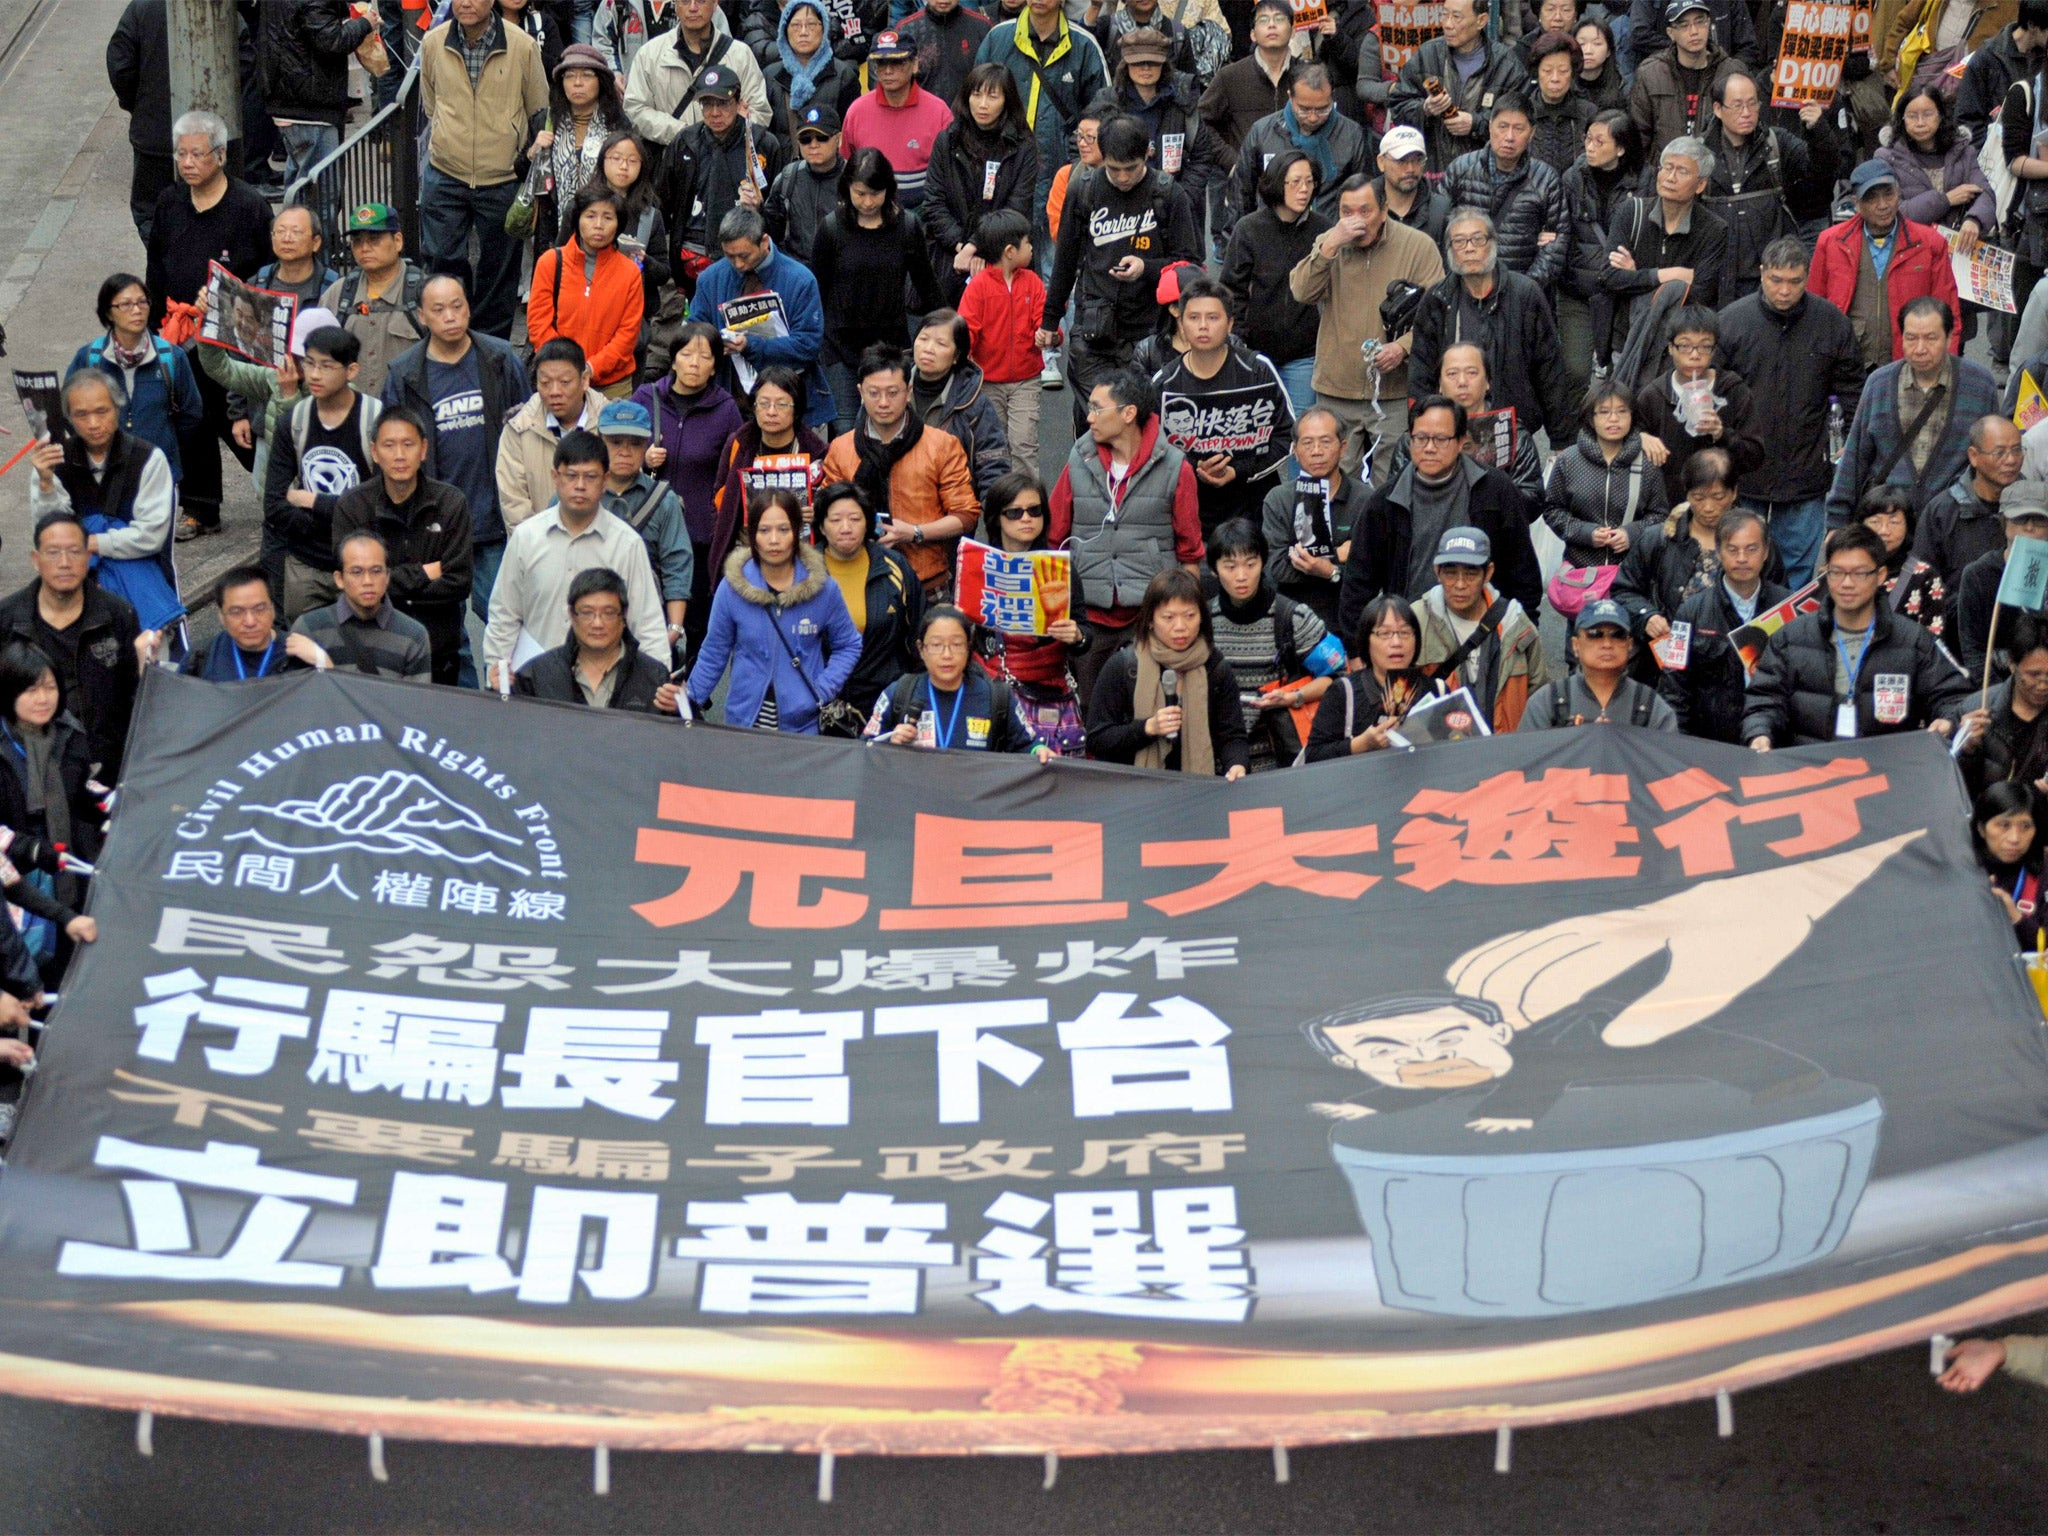 Thousands of protesters take to the streets calling for Leung Chun-ying to step down